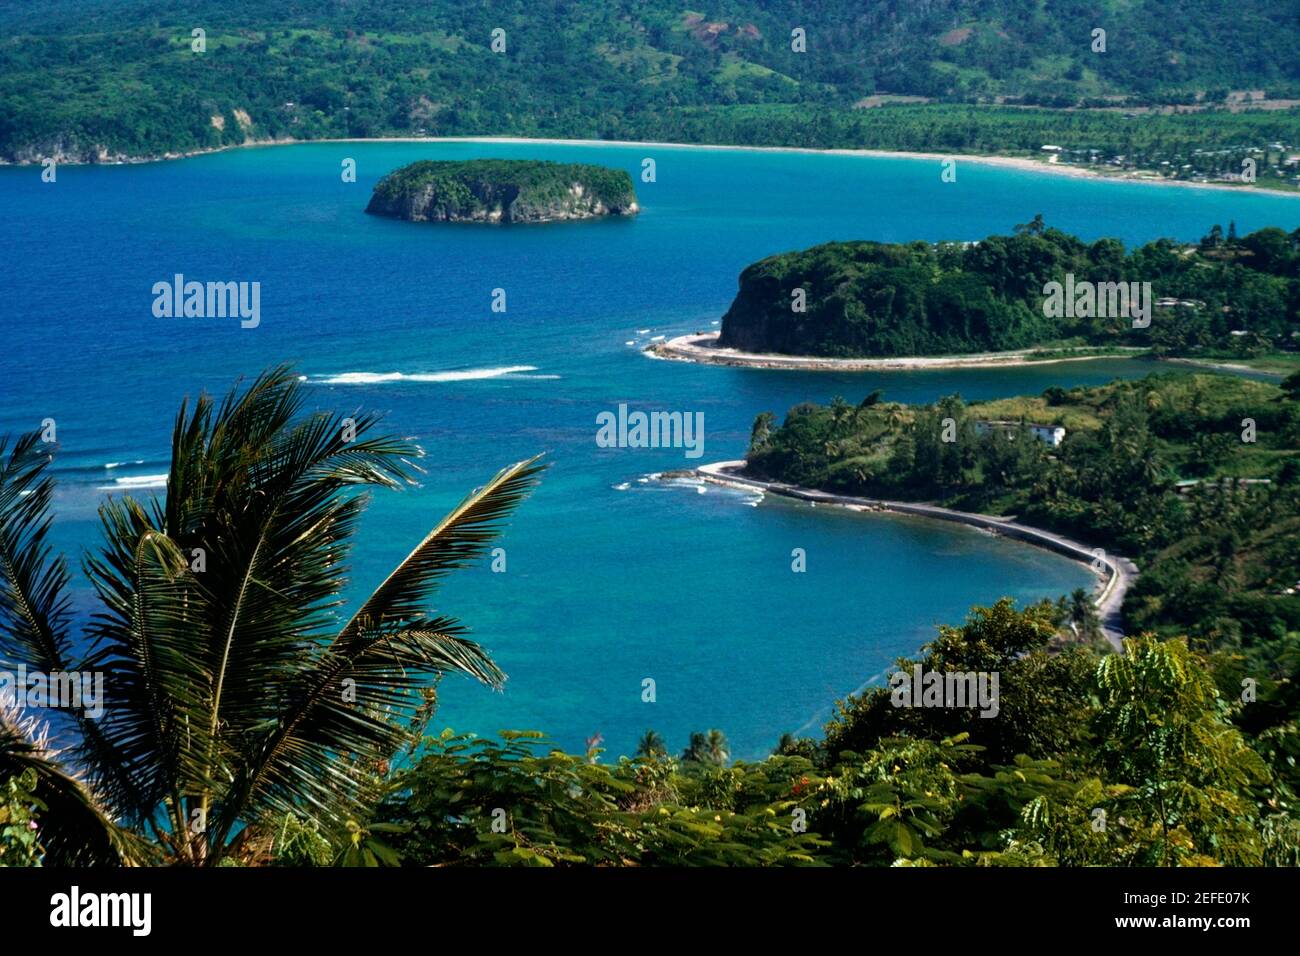 View of the Bay at Ocho Rios seen from Firefly, Jamaica Stock Photo